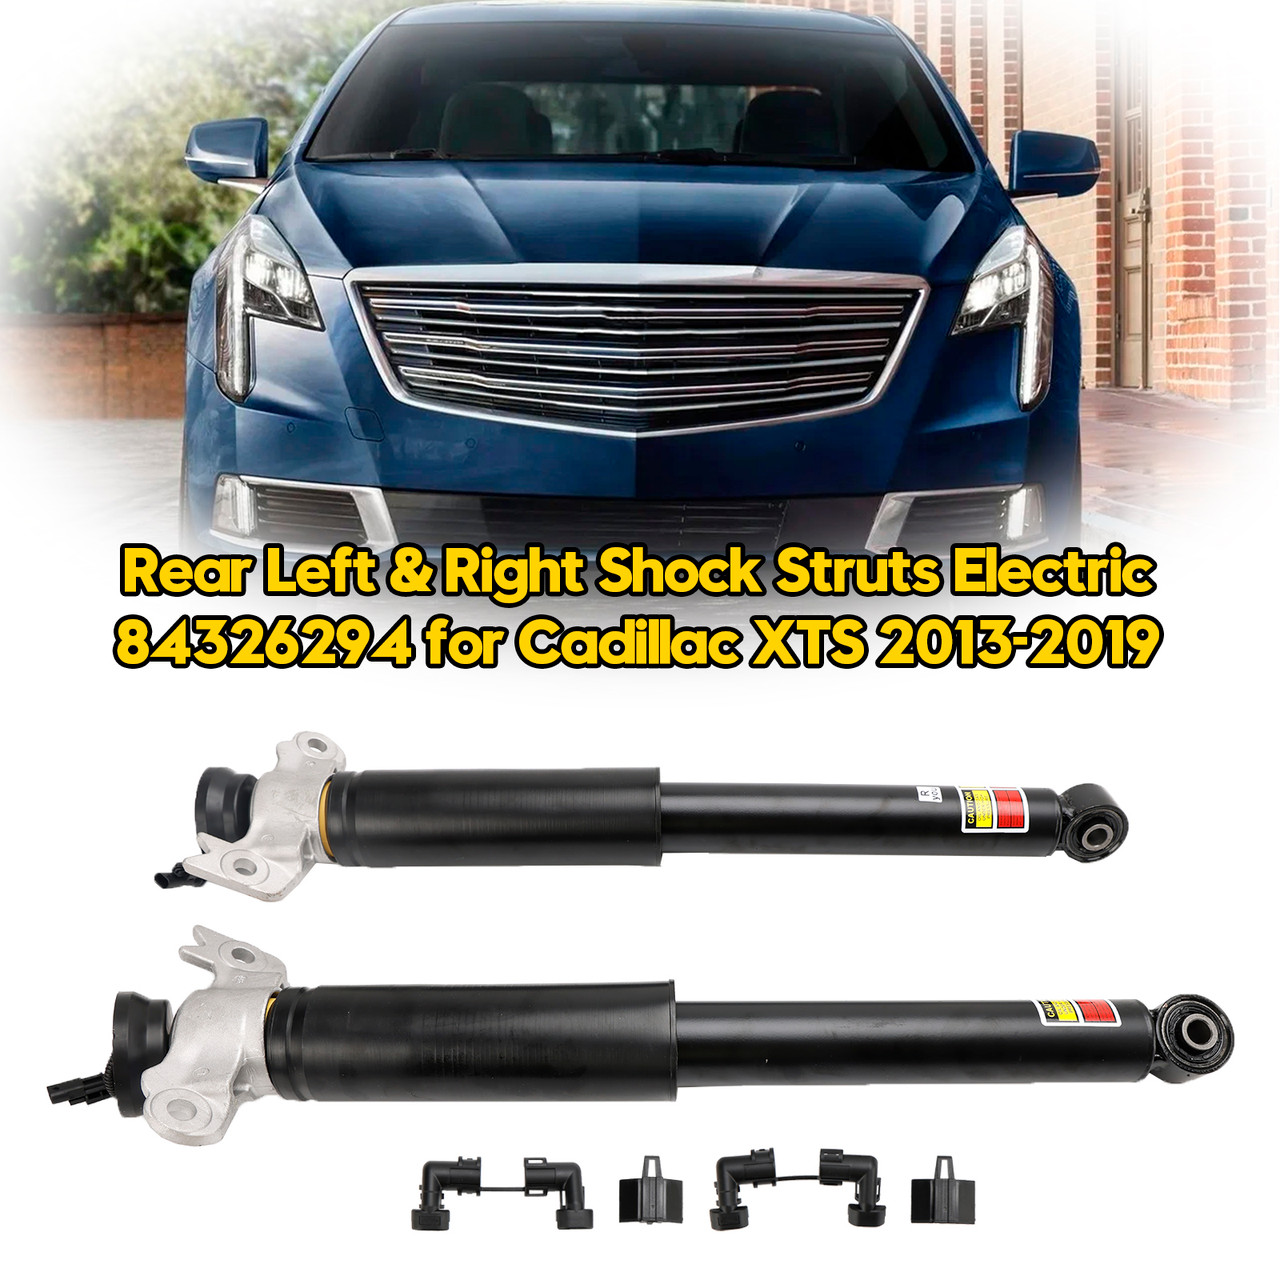 Rear Left & Right Shock Struts Electric 84326294 for Cadillac XTS 2013-2019